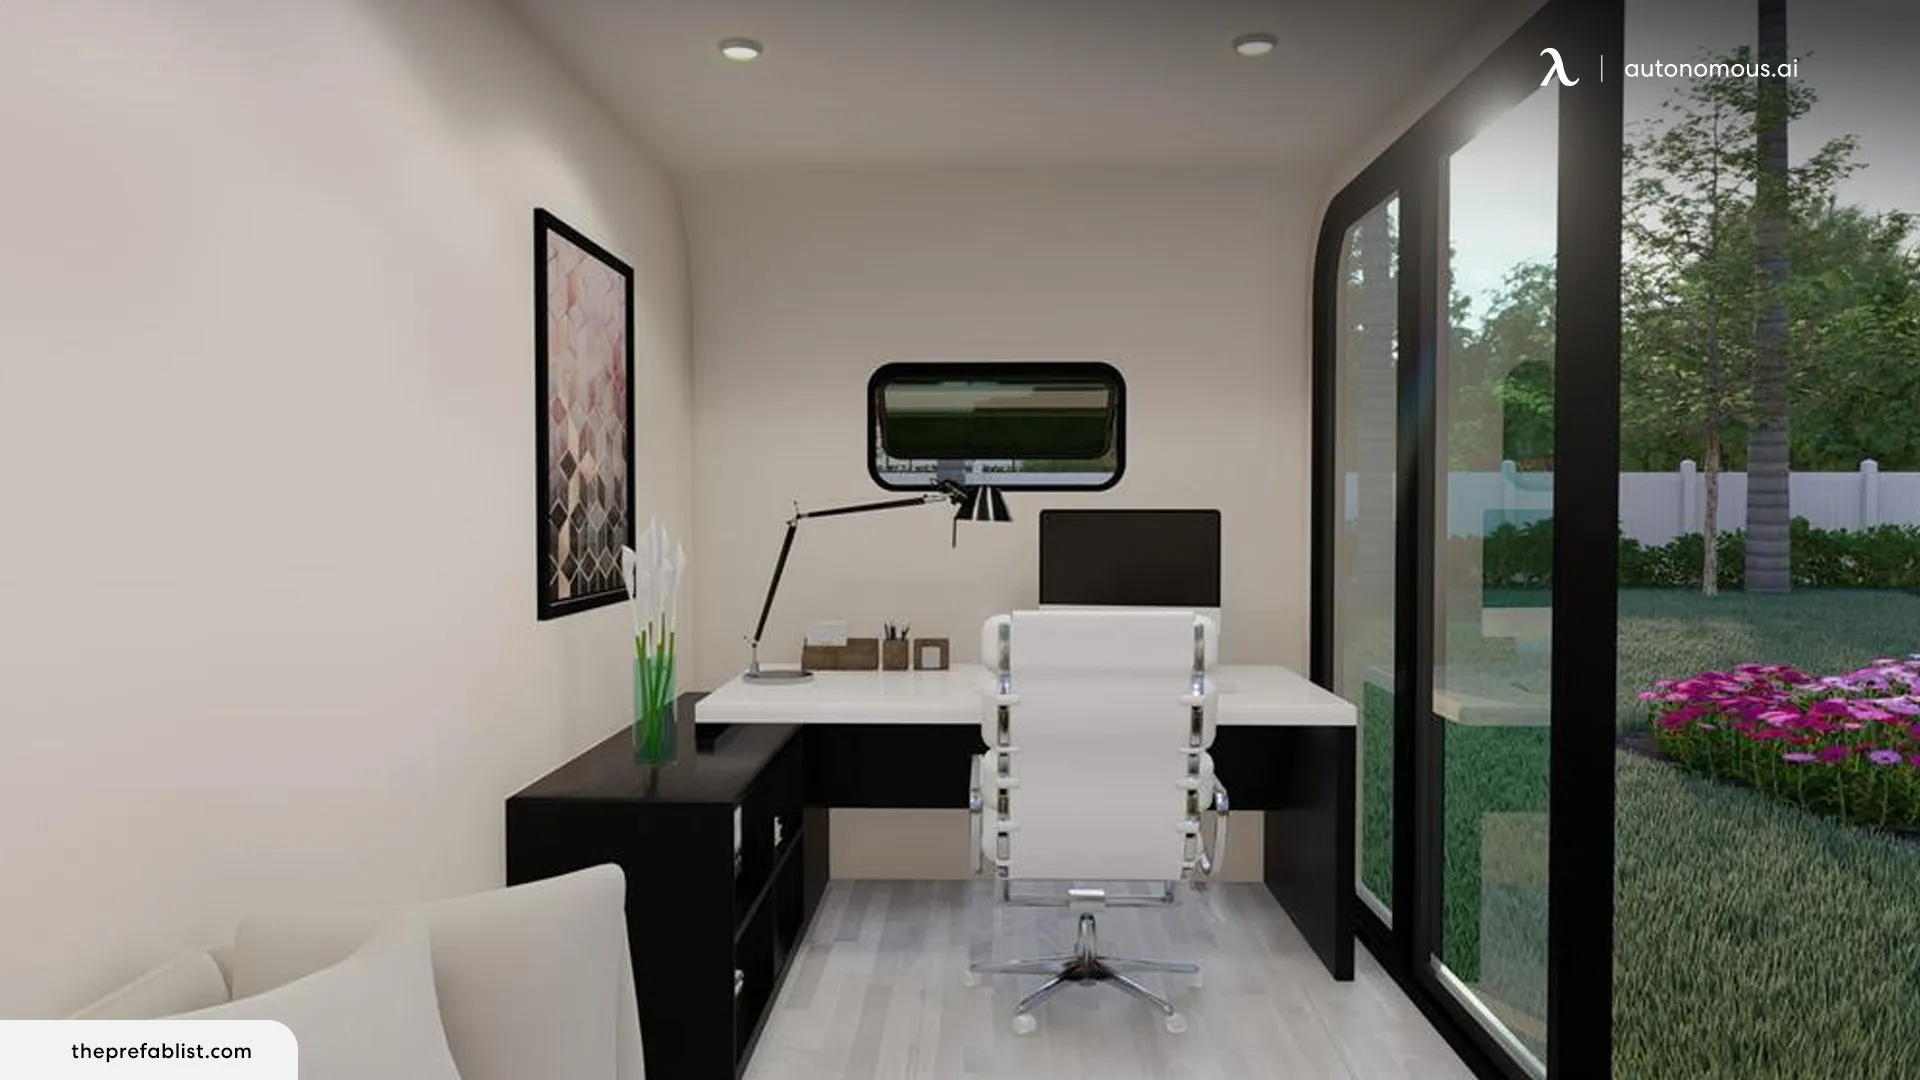 Benefits of Using Small Pre-Built Cabin as Home Office